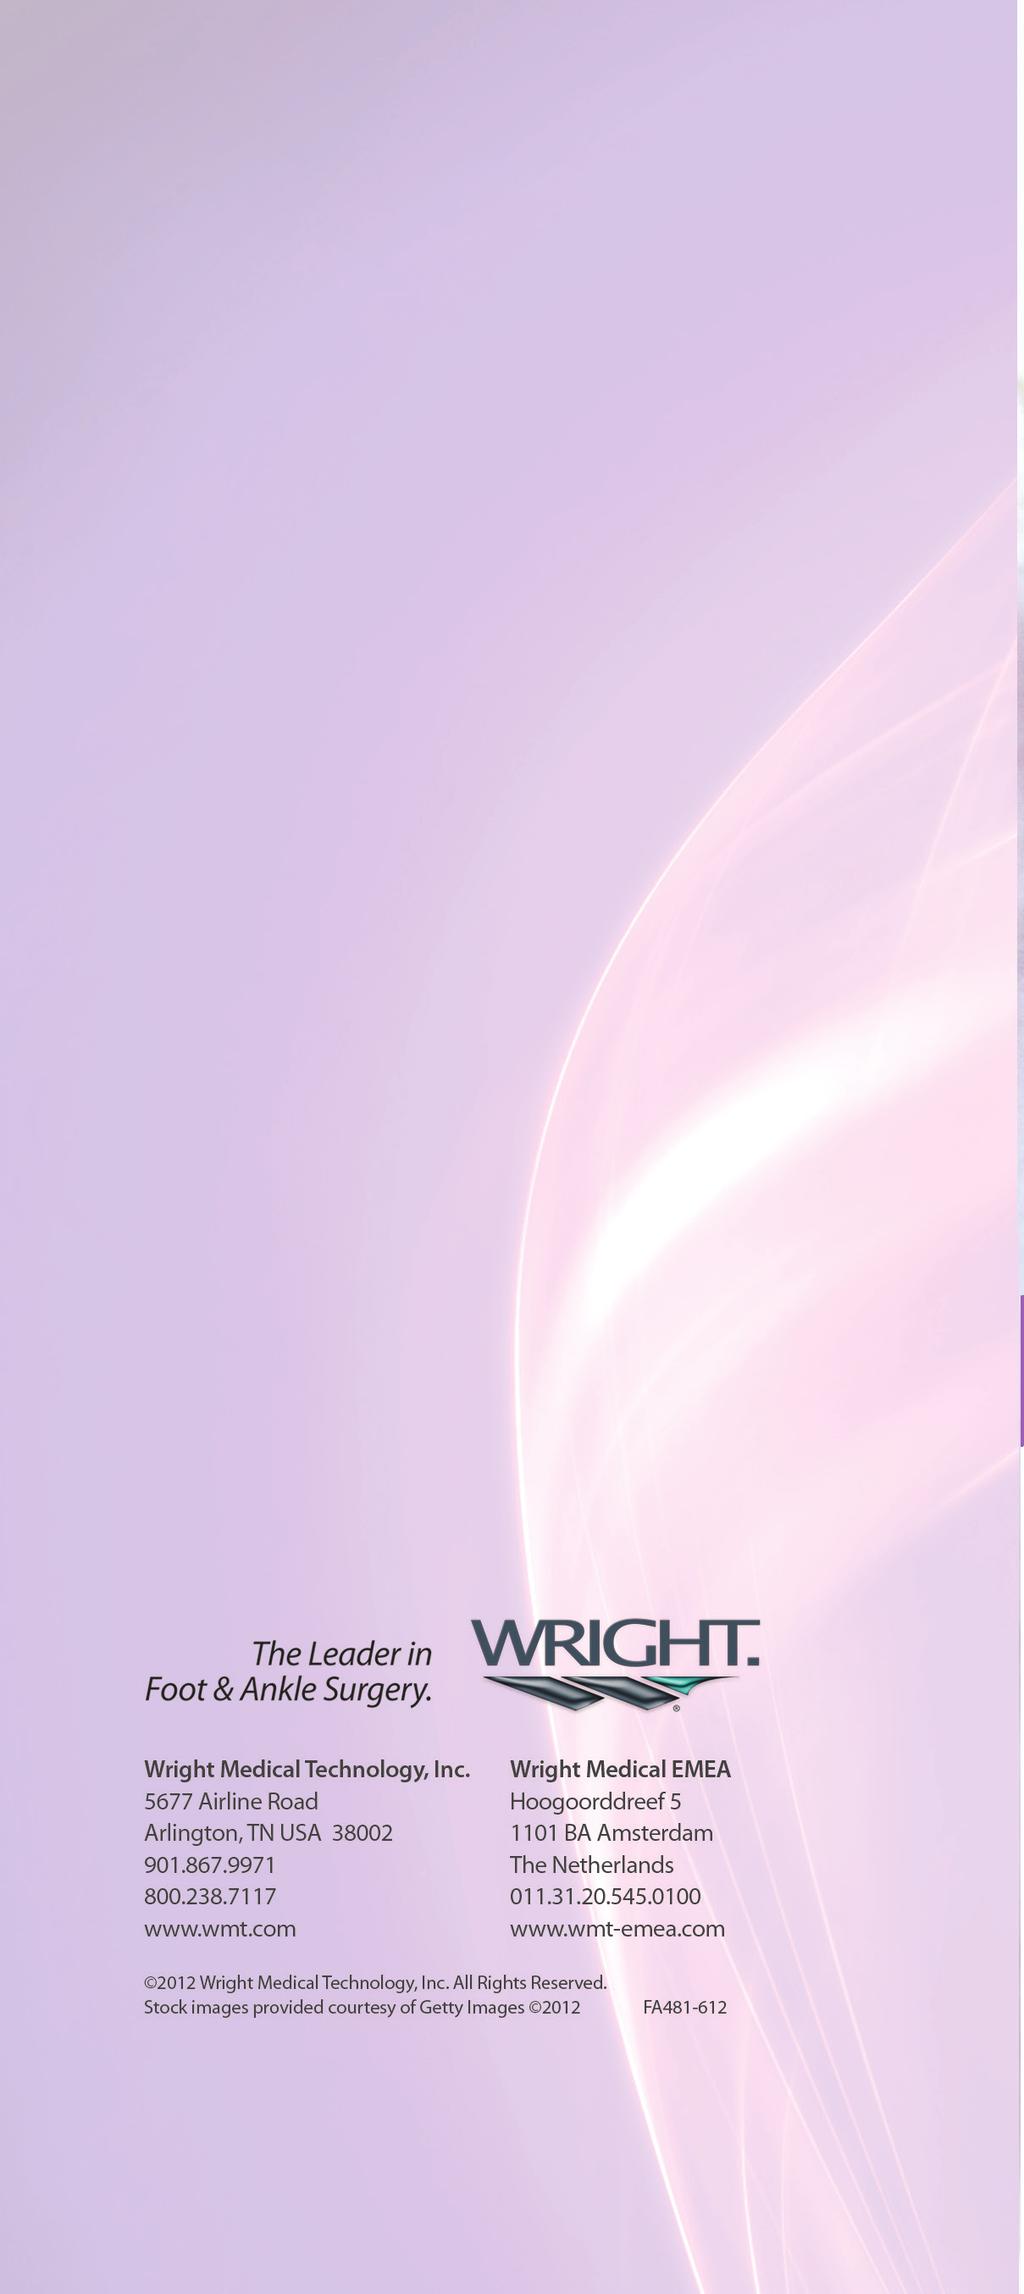 The MiToe implant is manufactured by Wright Medical, the recognized leader of surgical solutions for foot and ankle.